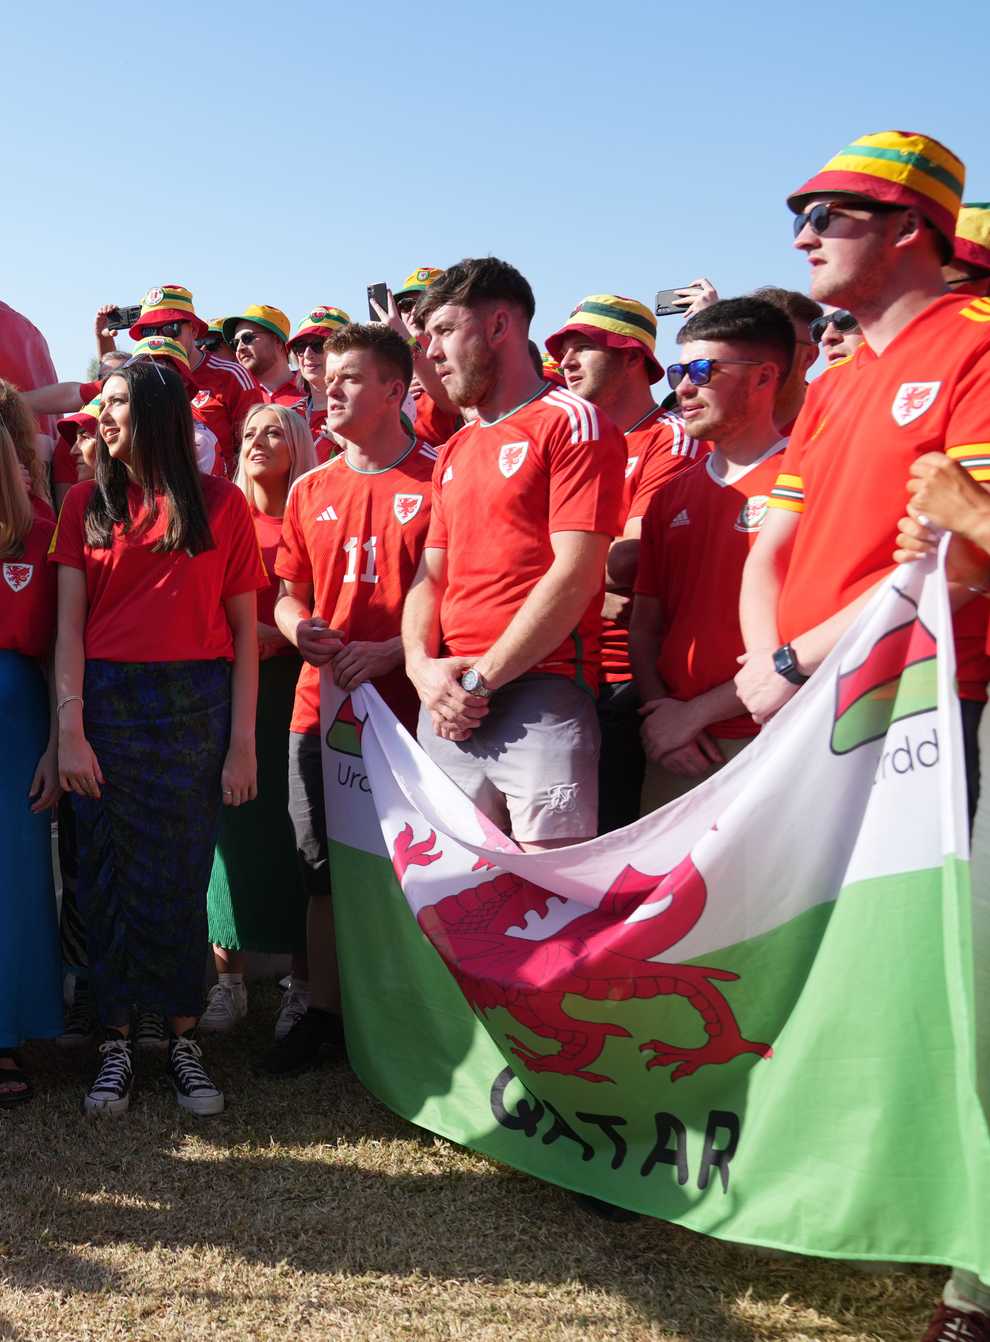 Hundreds of Wales fans gathered early in Doha to take part in a singalong ahead of their team’s match against Iran (Jonathan Brady/PA)